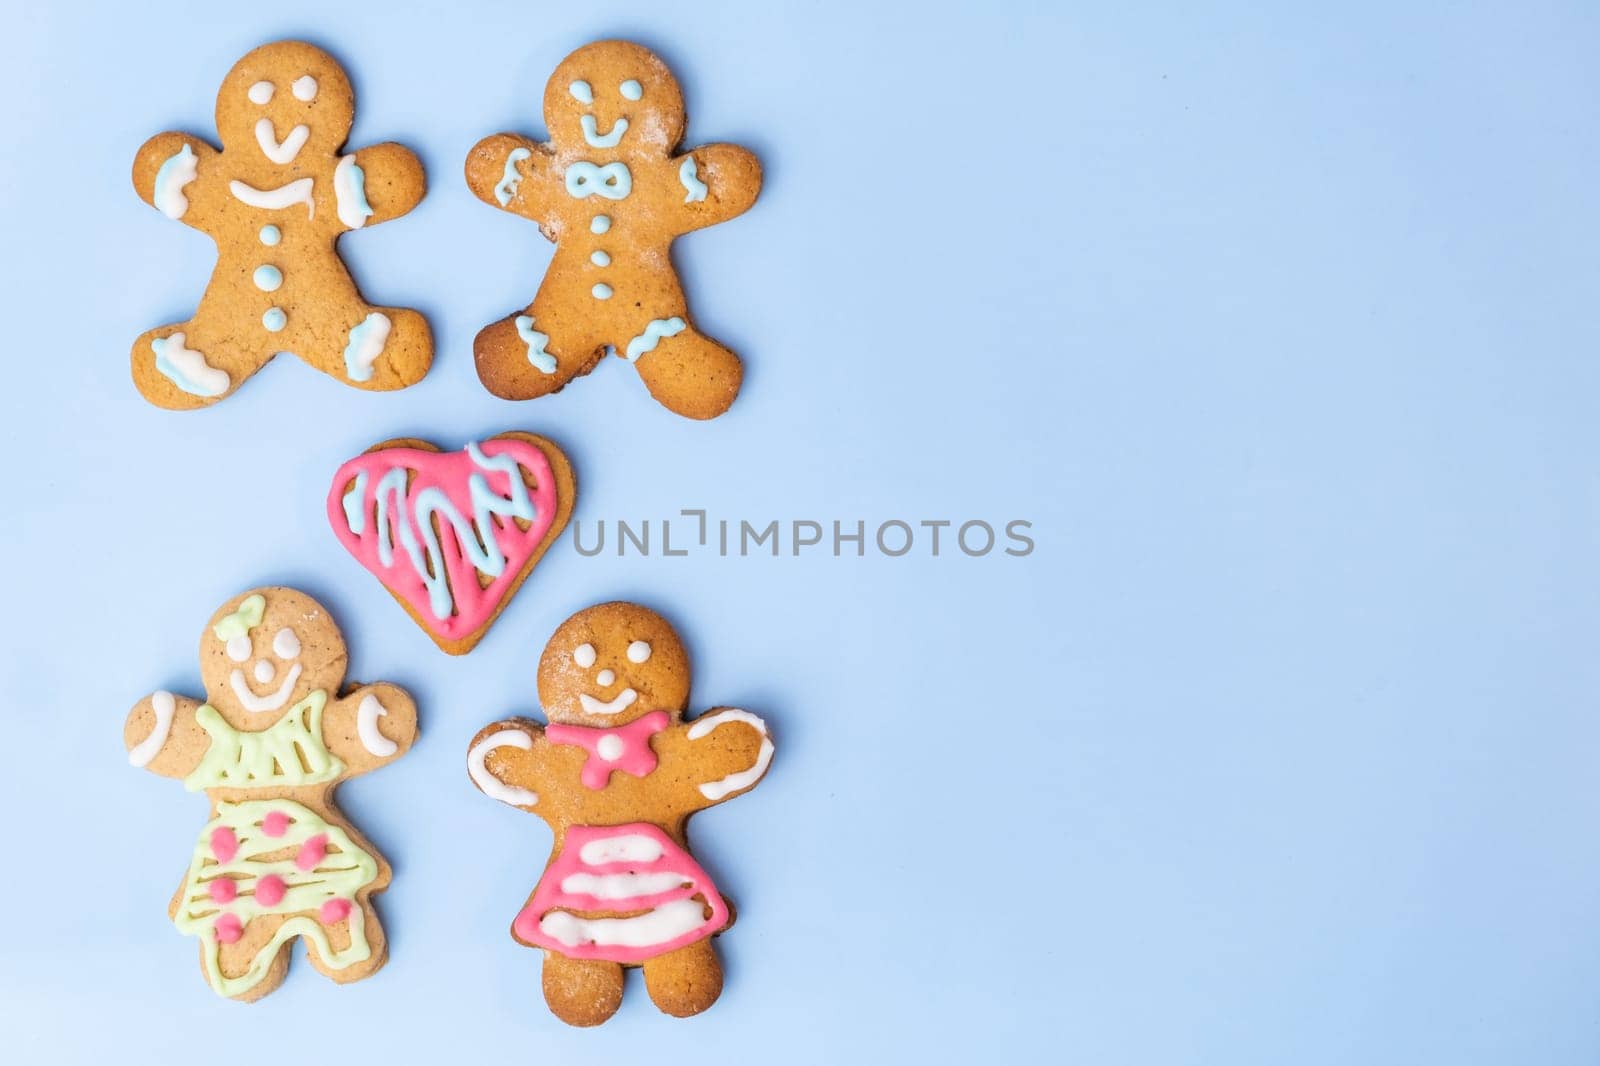 Homosexual couple cookies or gingerbreads and heart with colorful icing for St Valentines Day on the blue background with copy space.